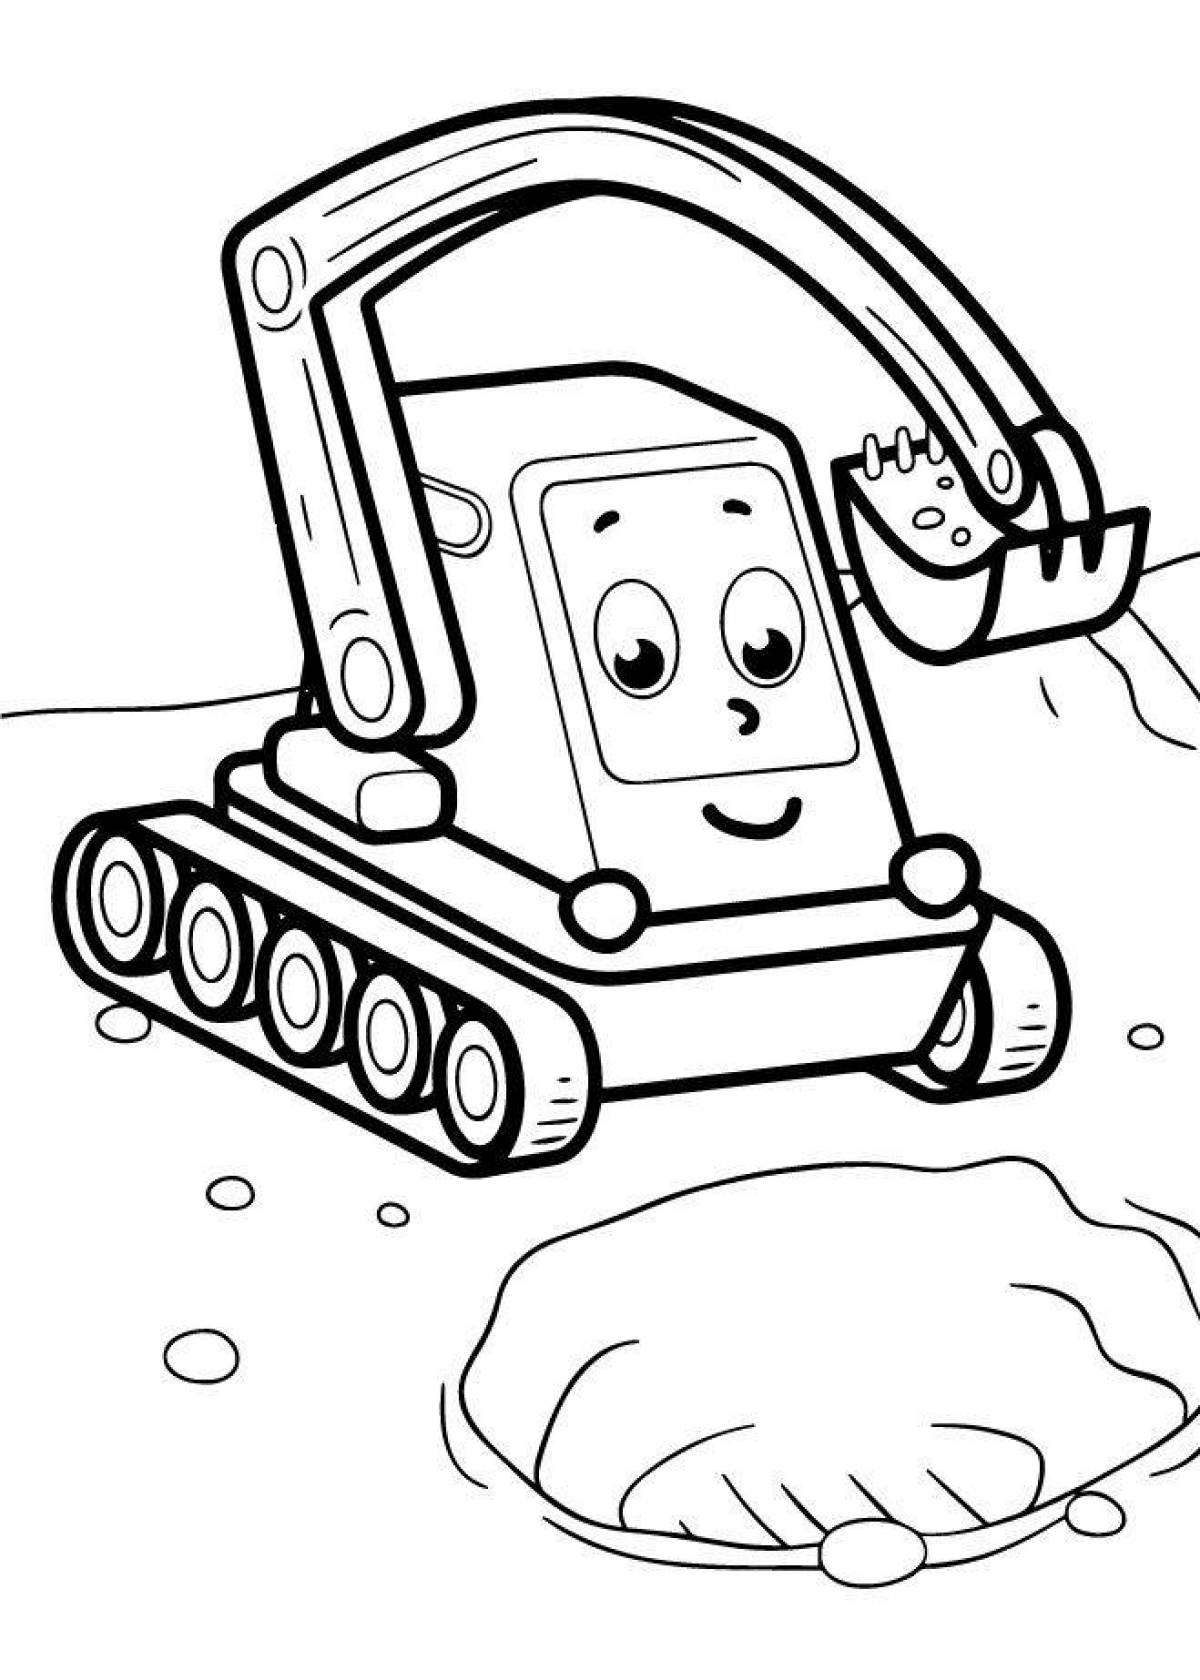 Colorful excavator coloring book for kids